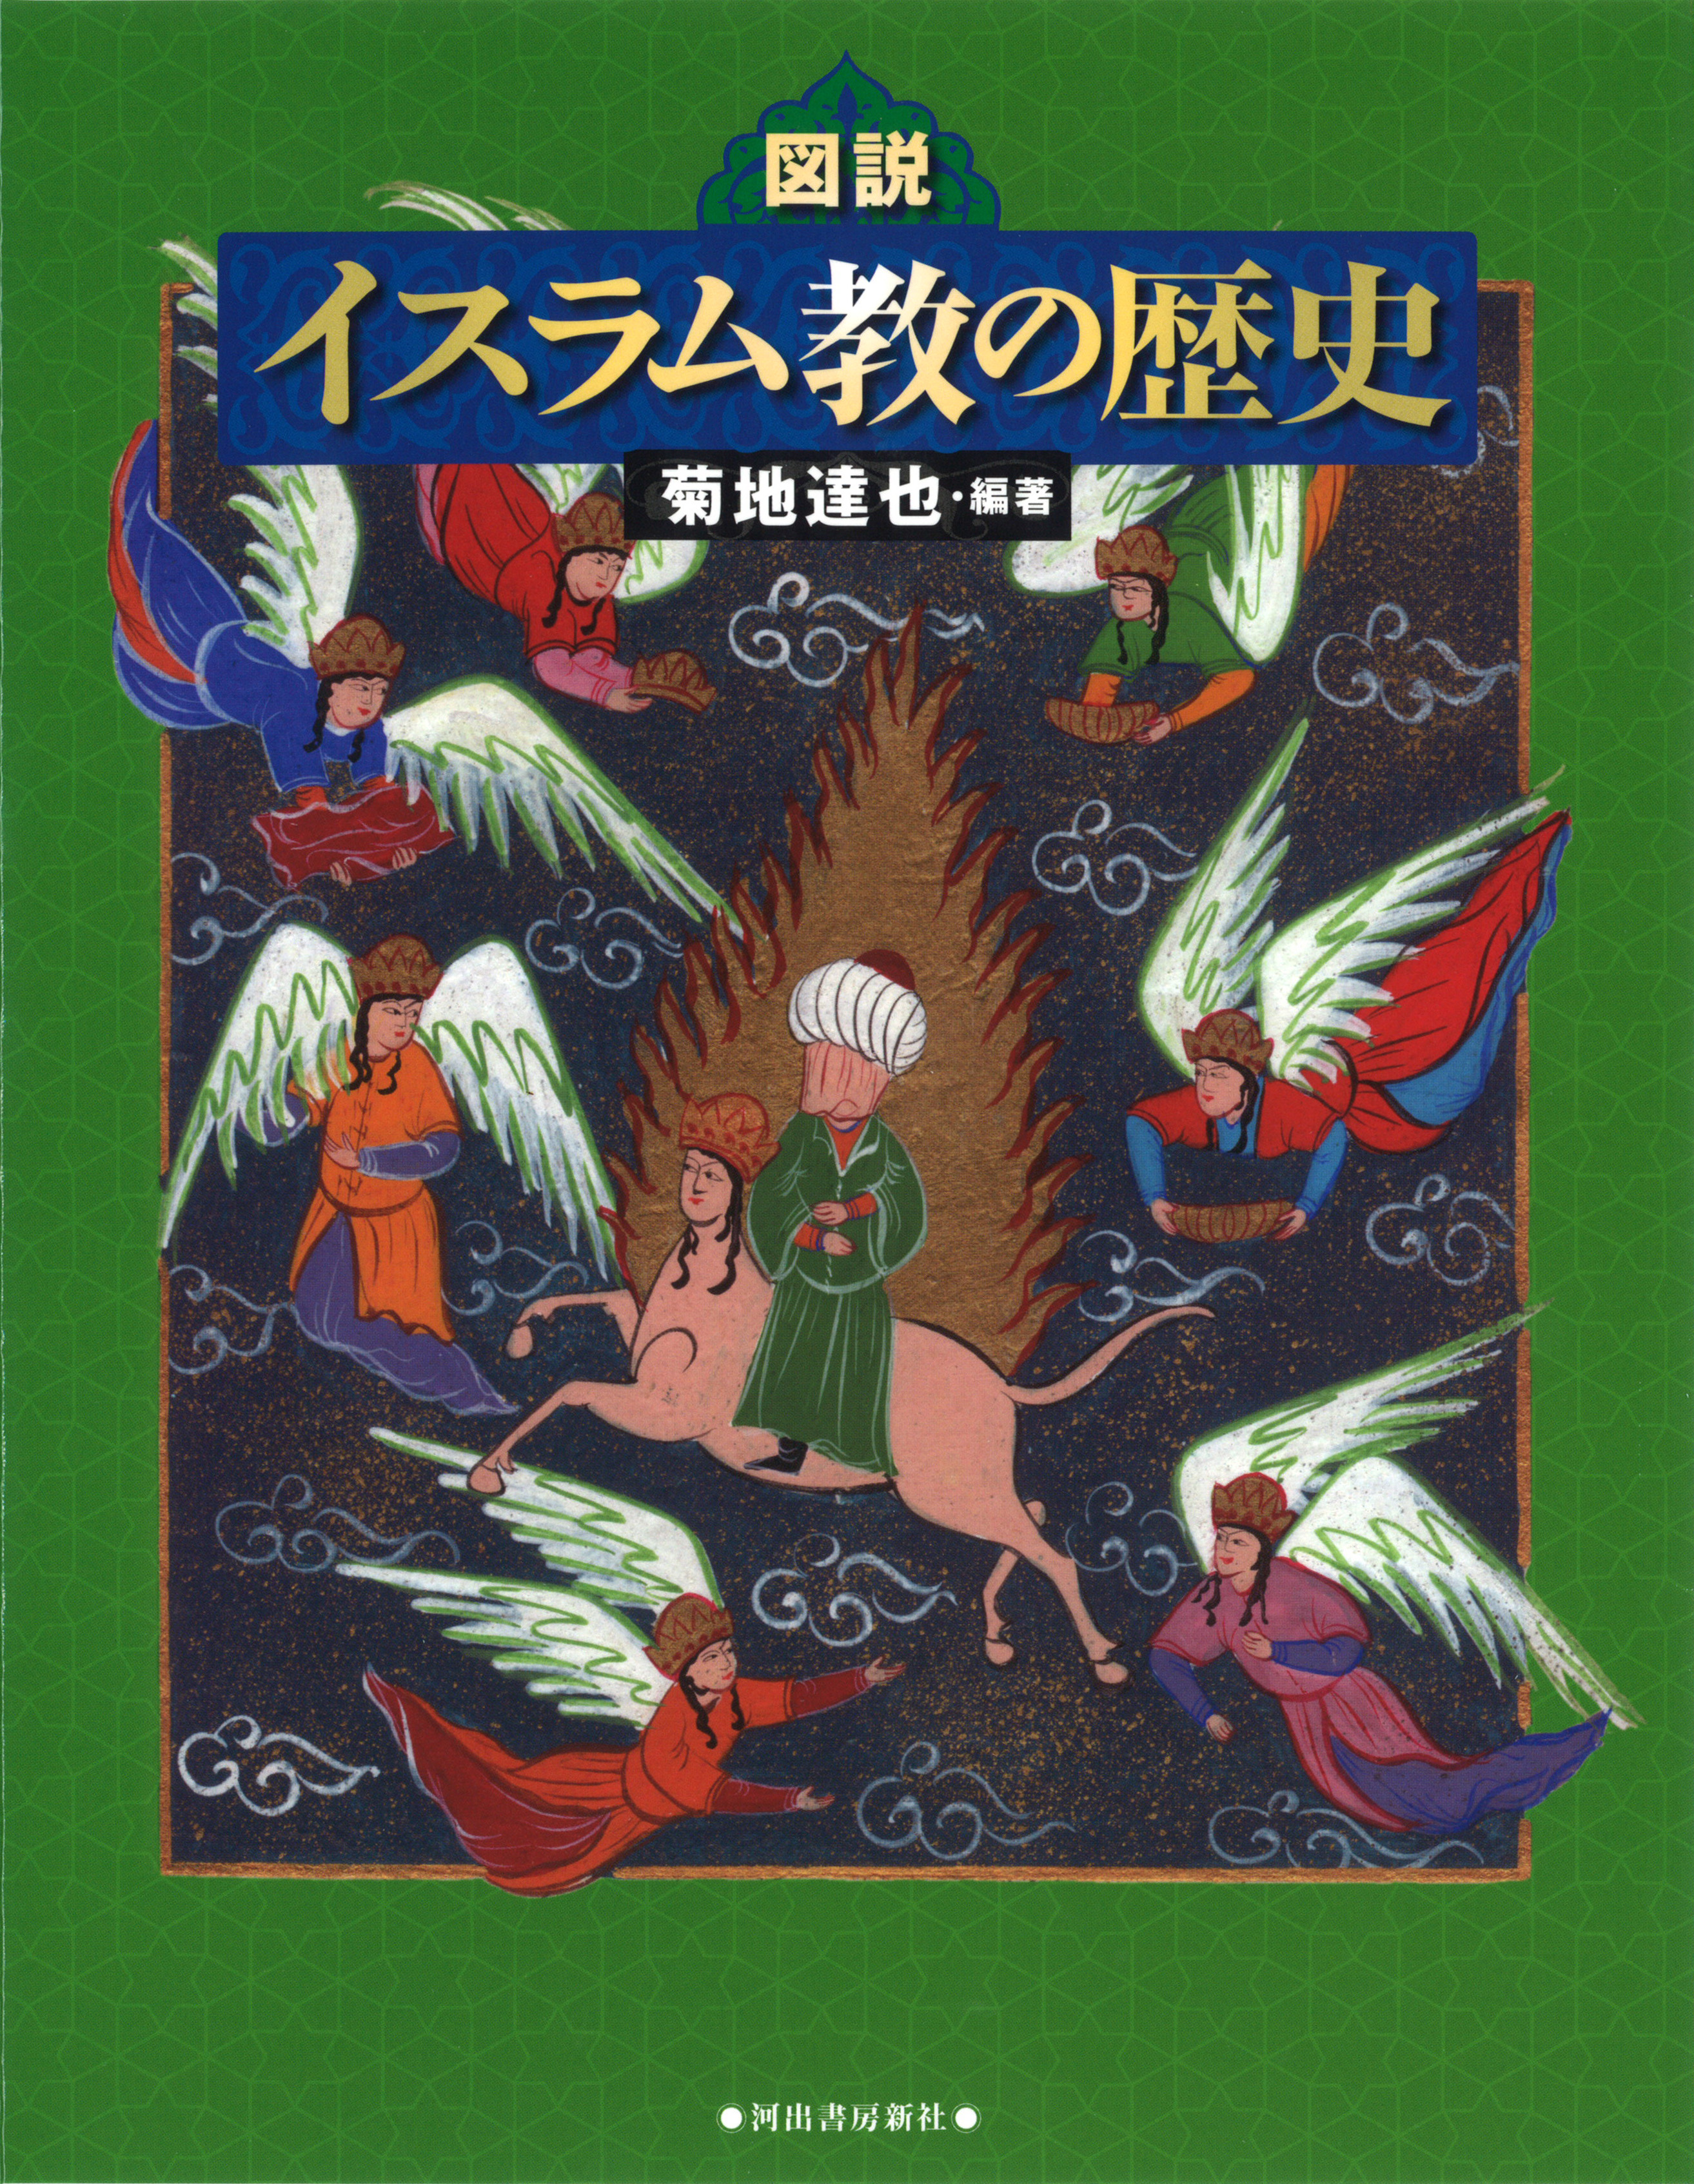 An illustration of Muslims in the center of dark green cover